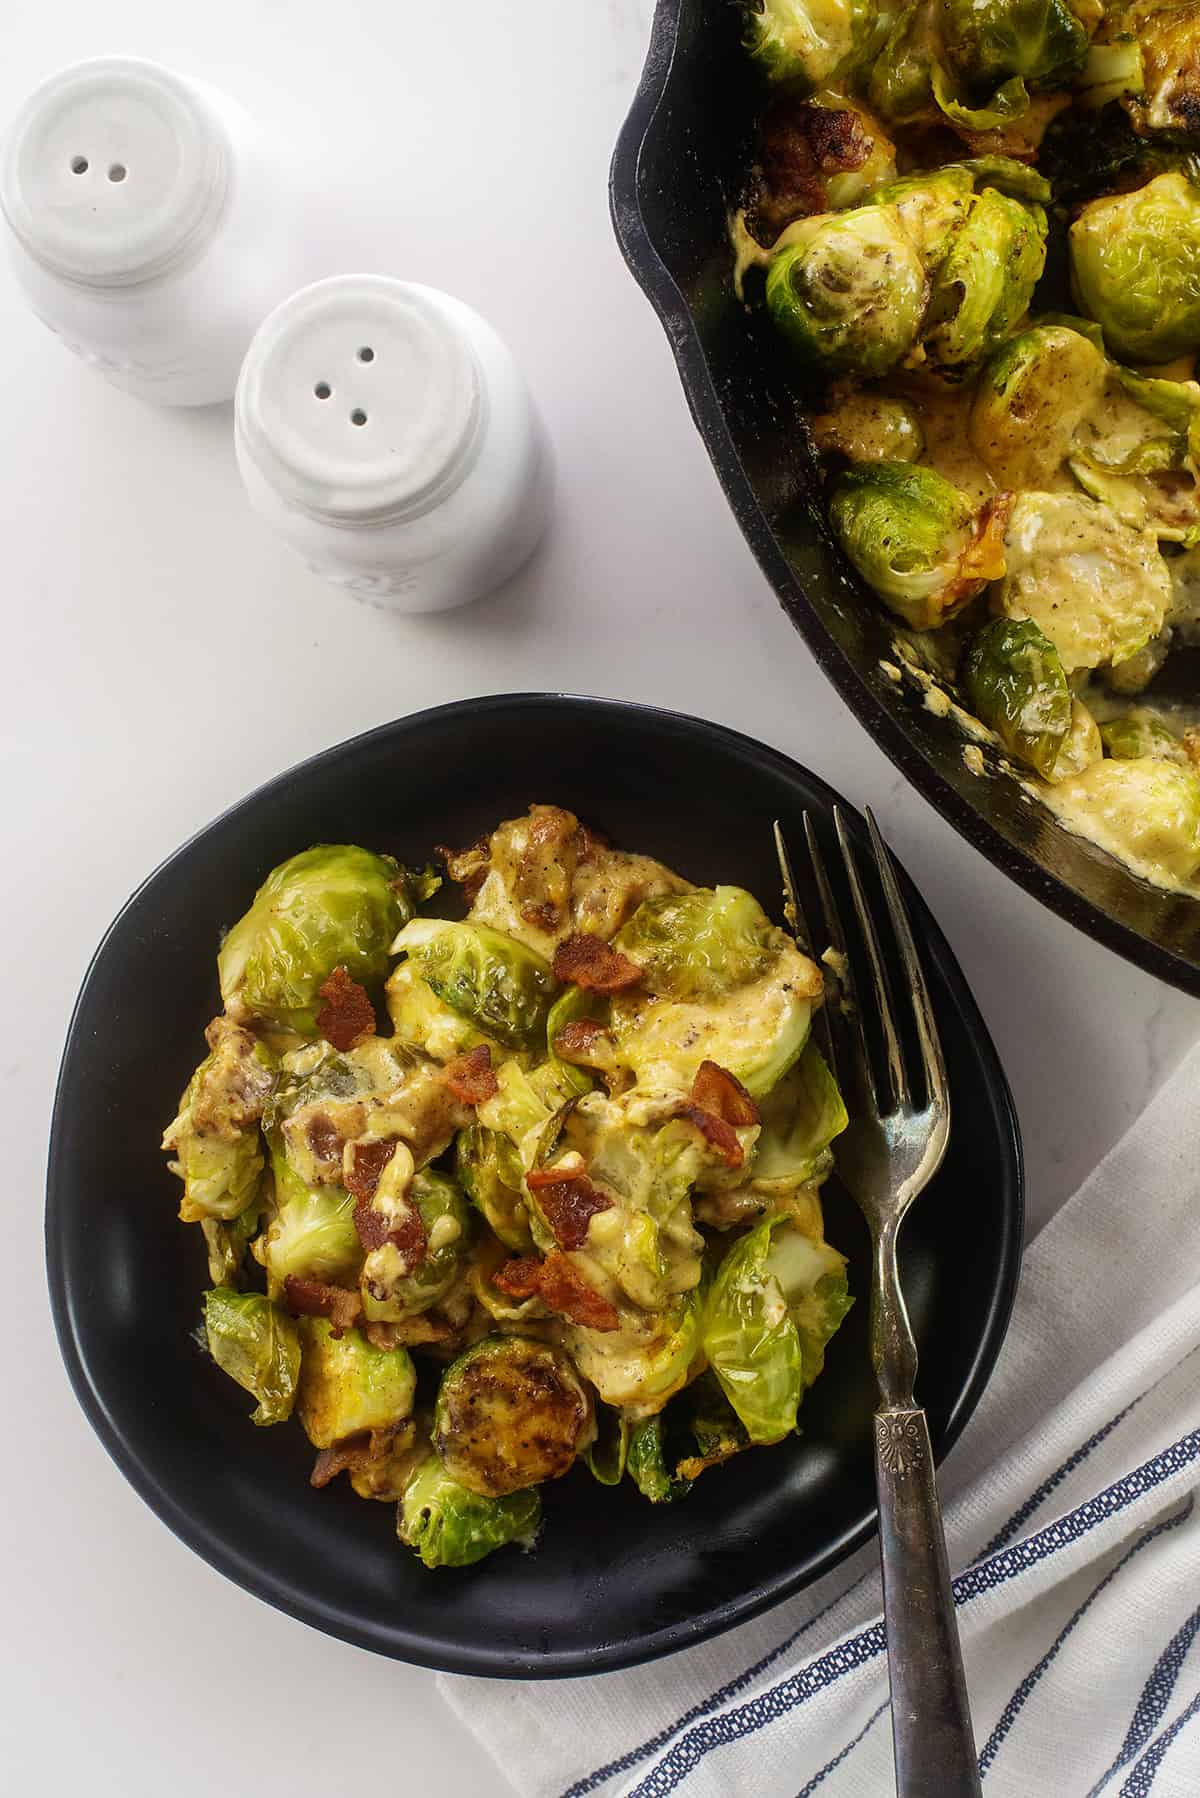 Overhead view of Brussels sprouts casserole on black plate next to skillet.